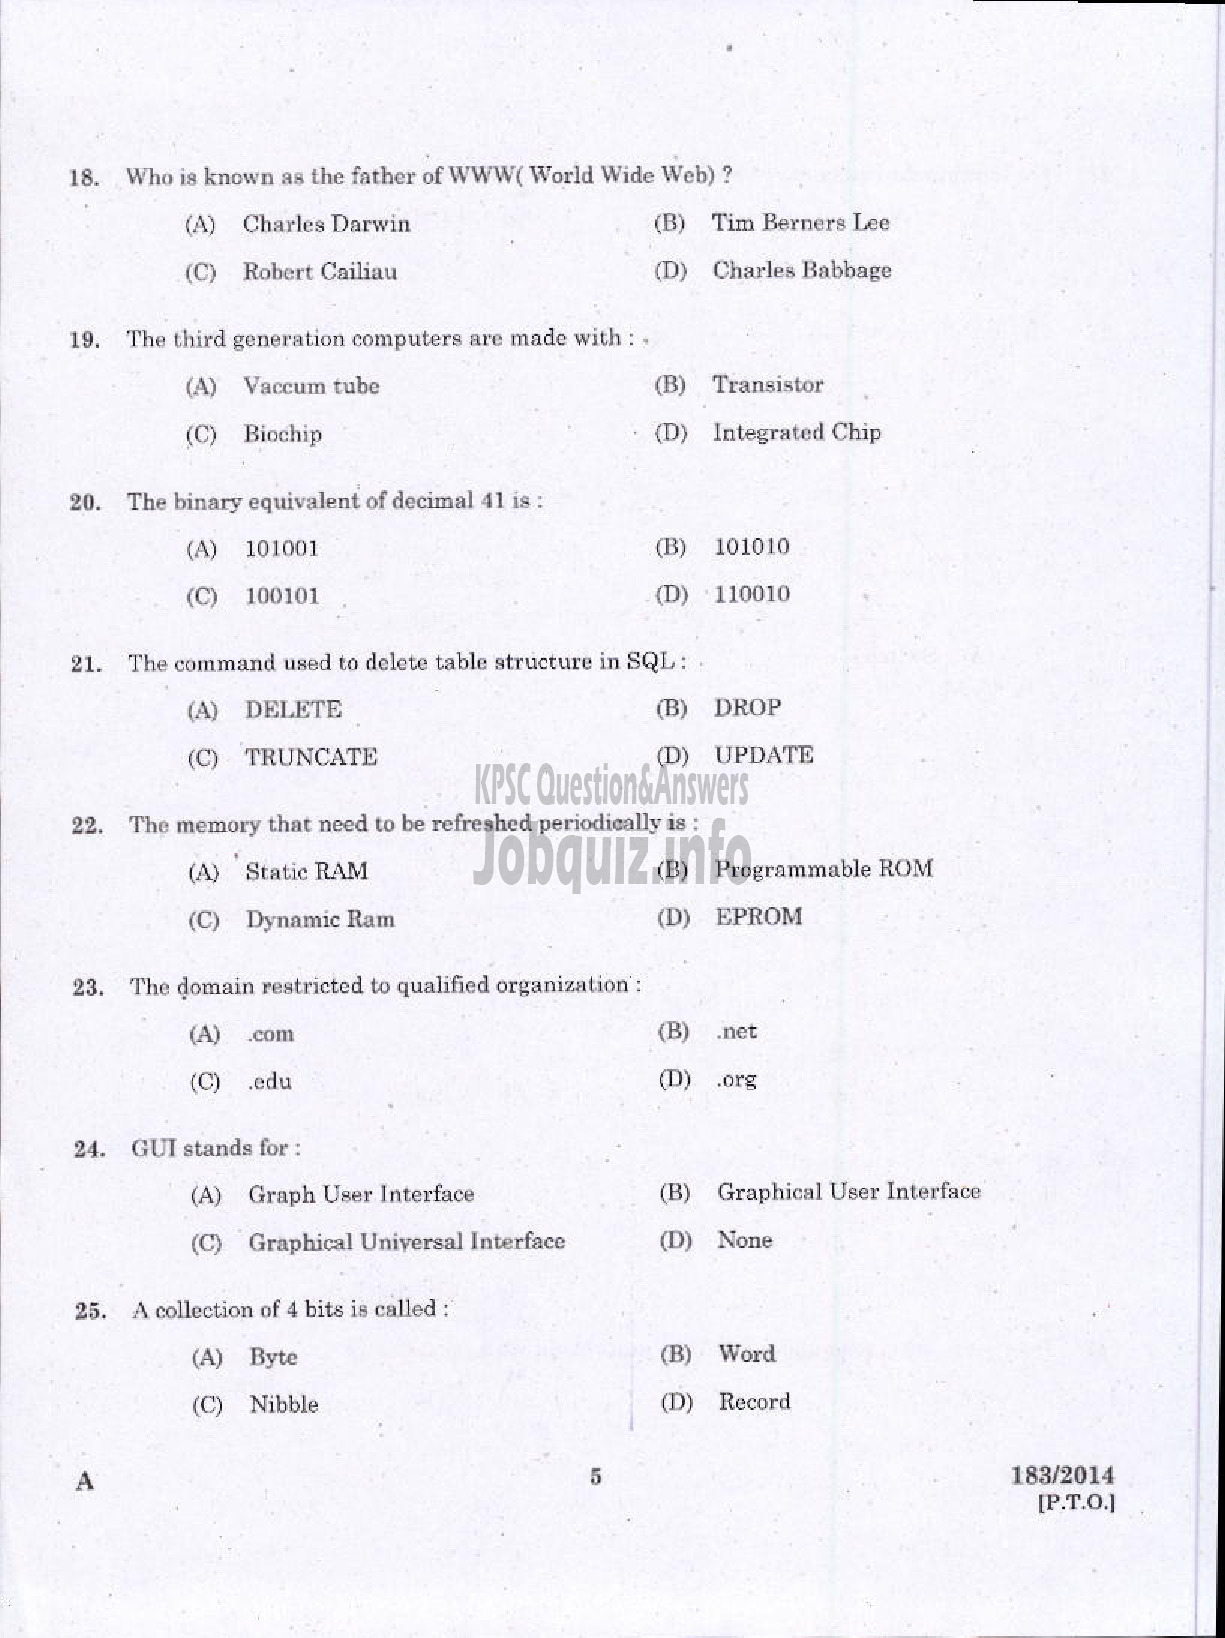 Kerala PSC Question Paper - TRADESMAN COMPUTER ENGINEERING TECHNICAL EDUCATION TVM KGD-3